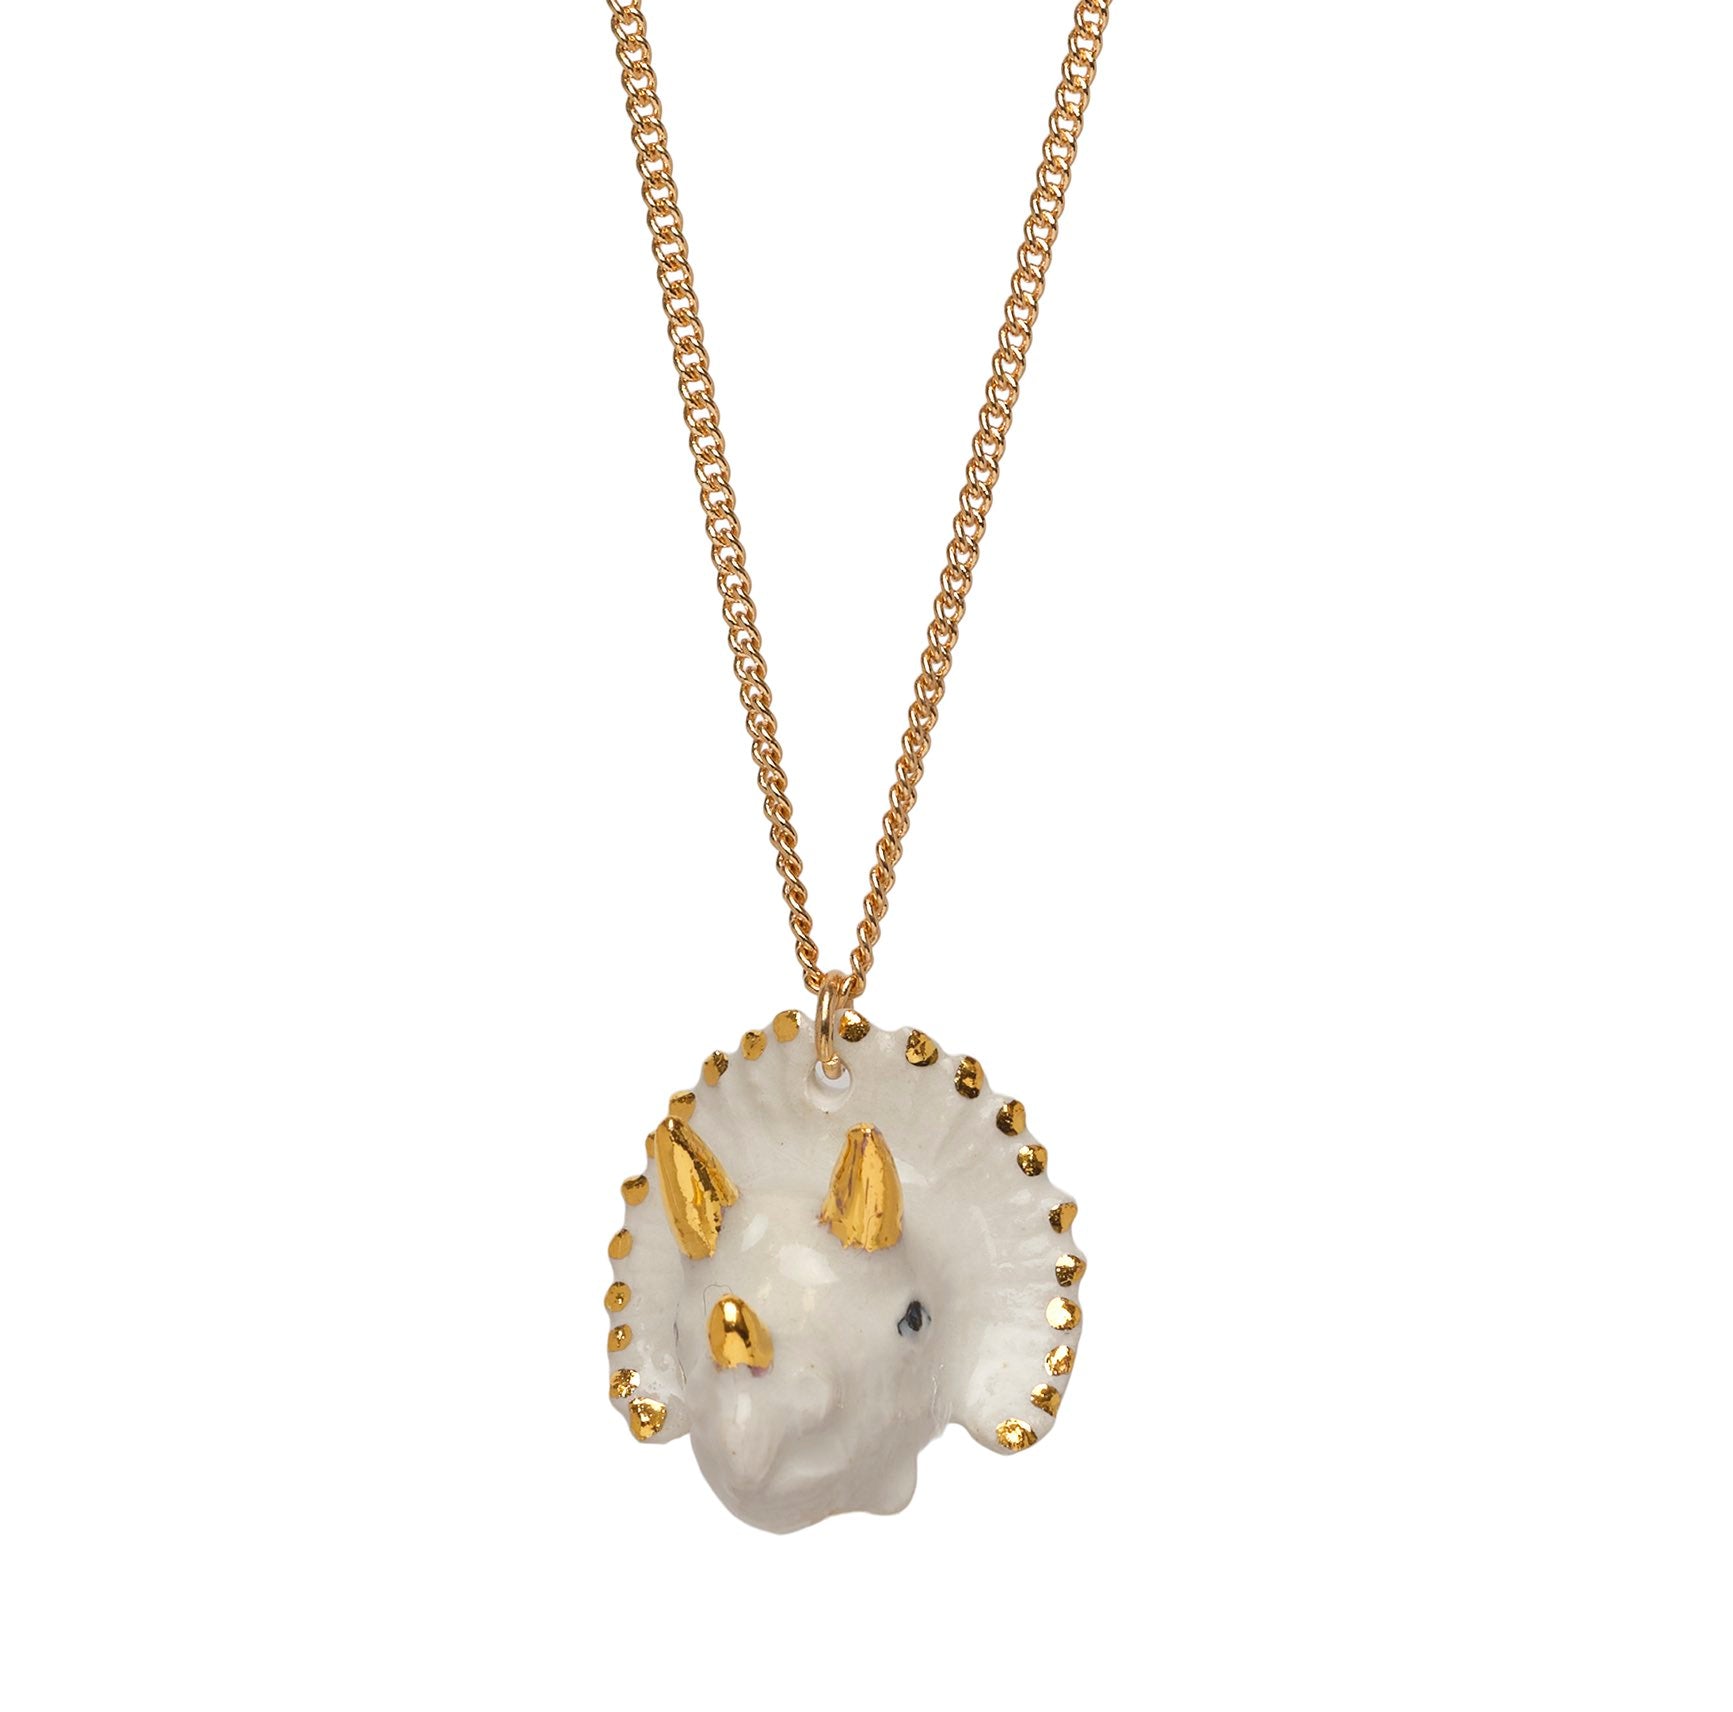 Small White and Gold Triceratops Necklace